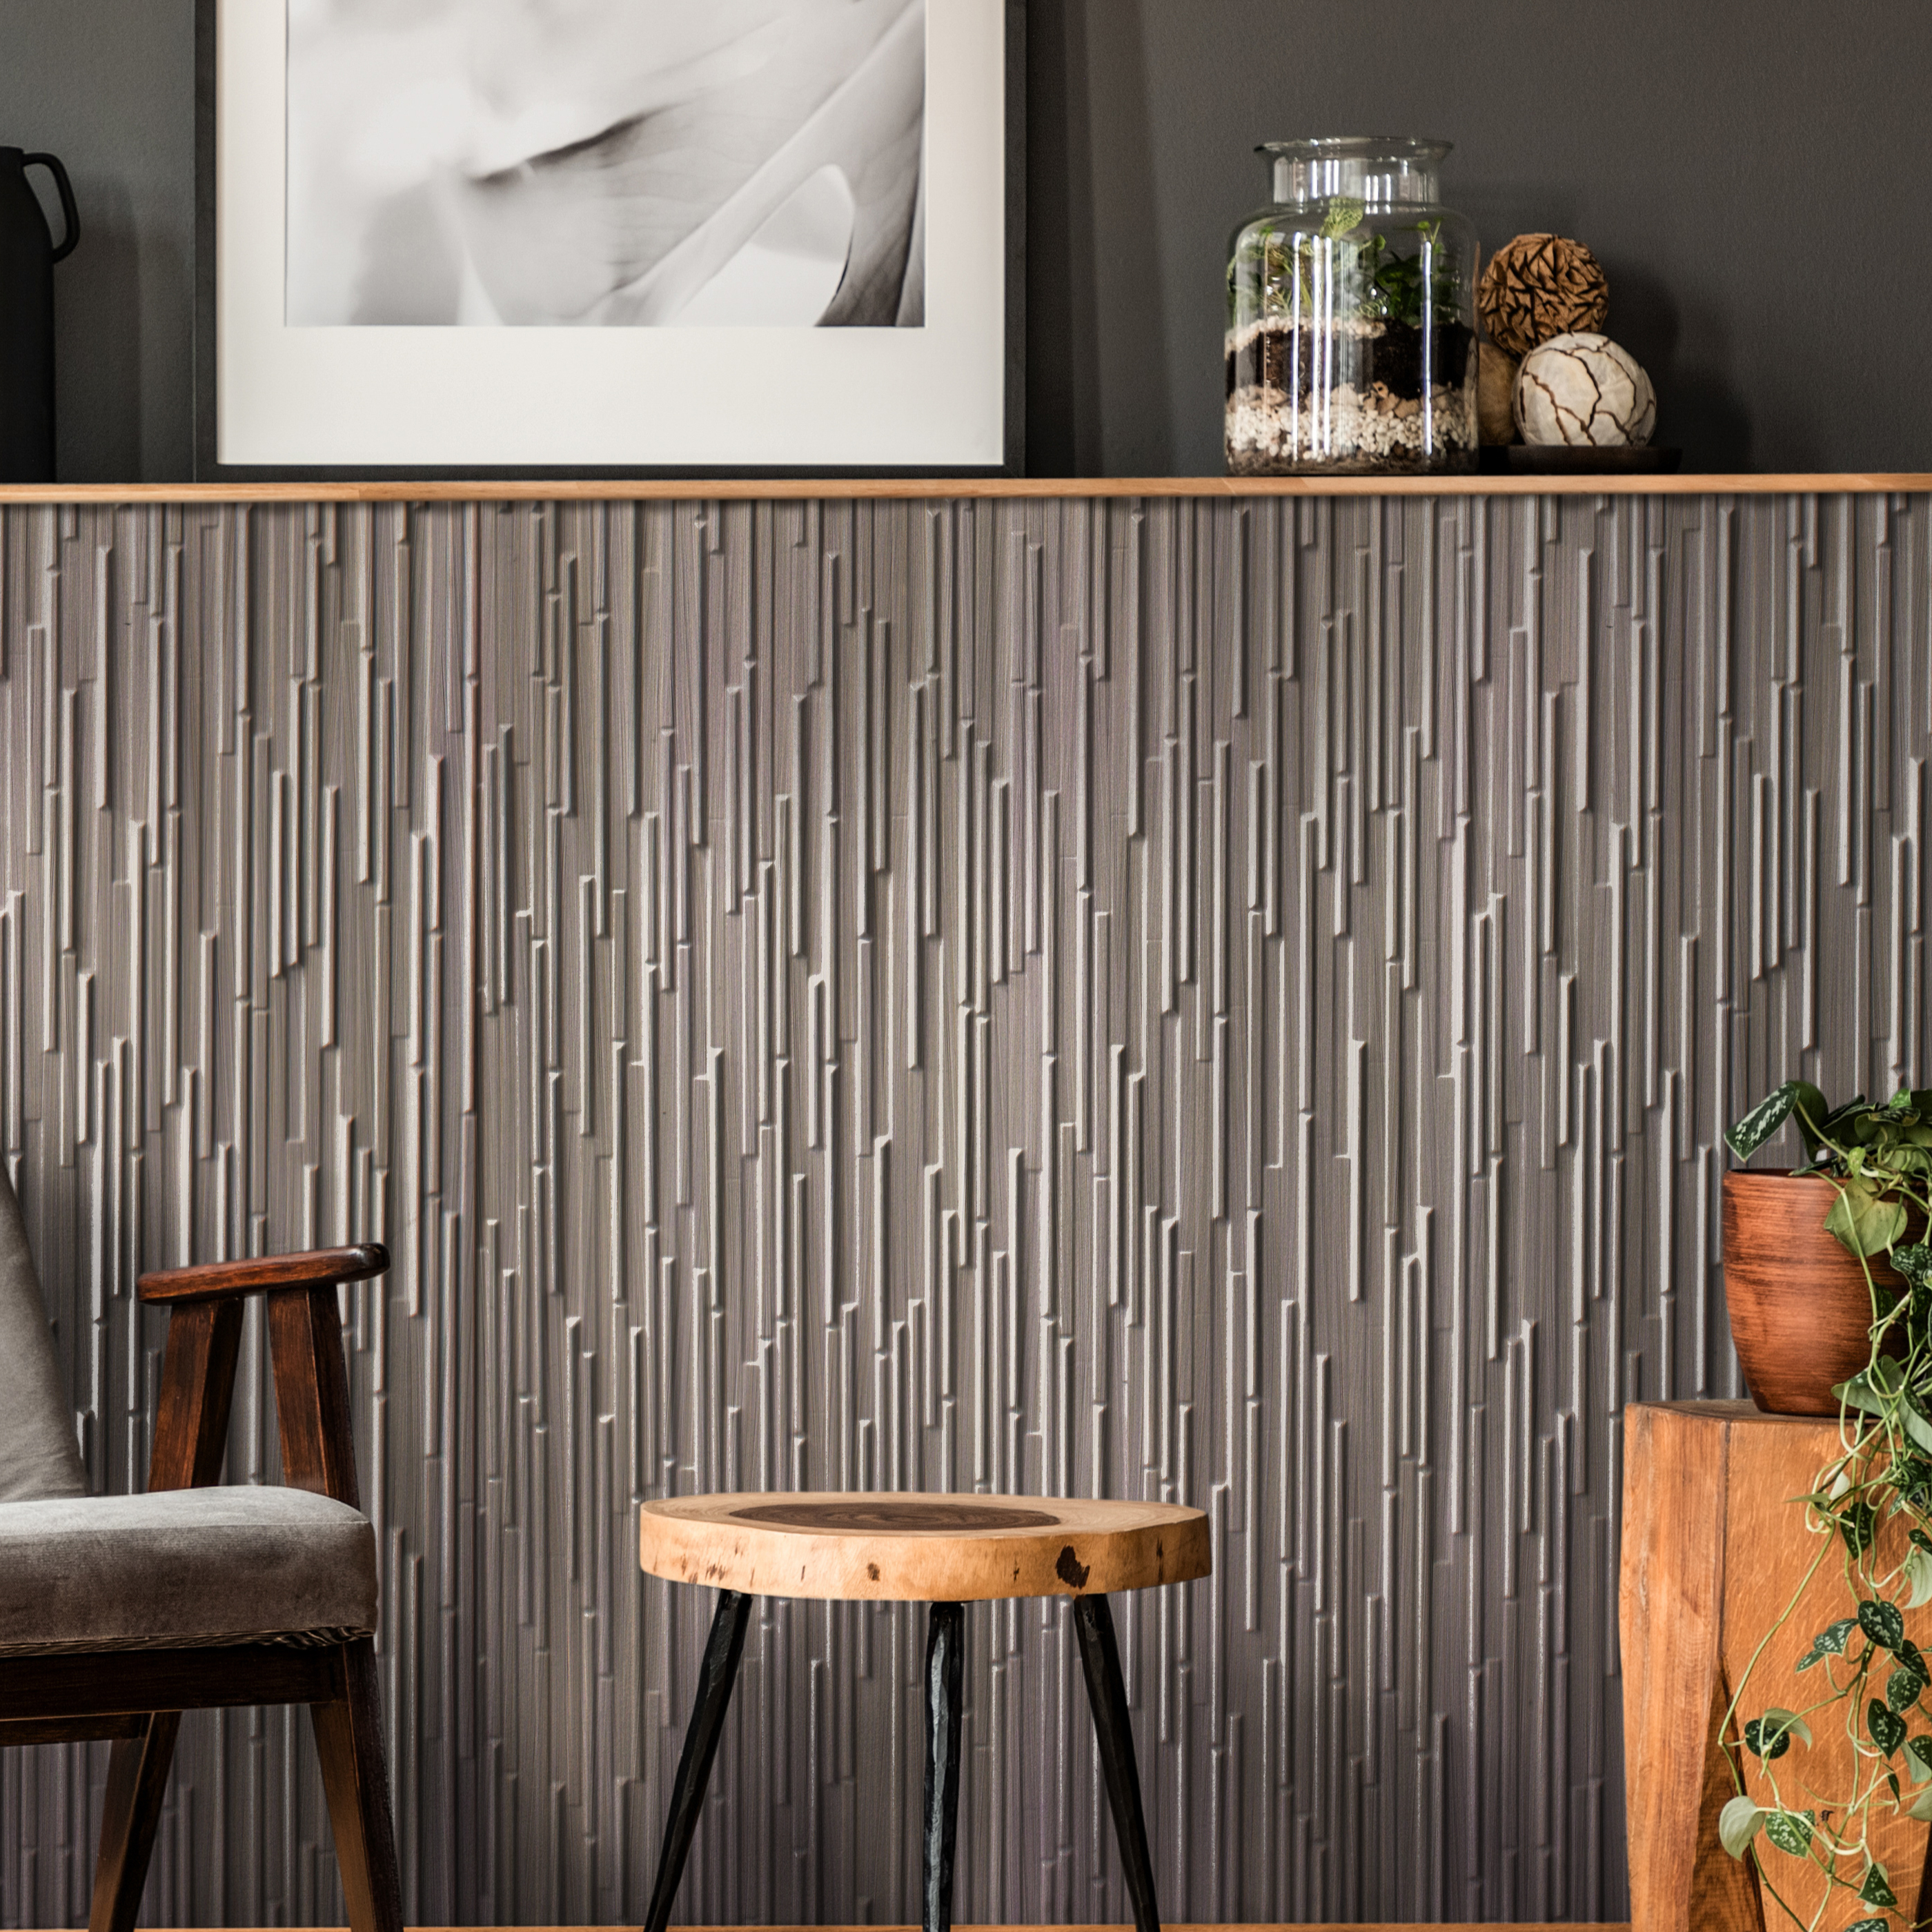 Commercial wall panels can add dimension, texture, and visual interest to any interior space.